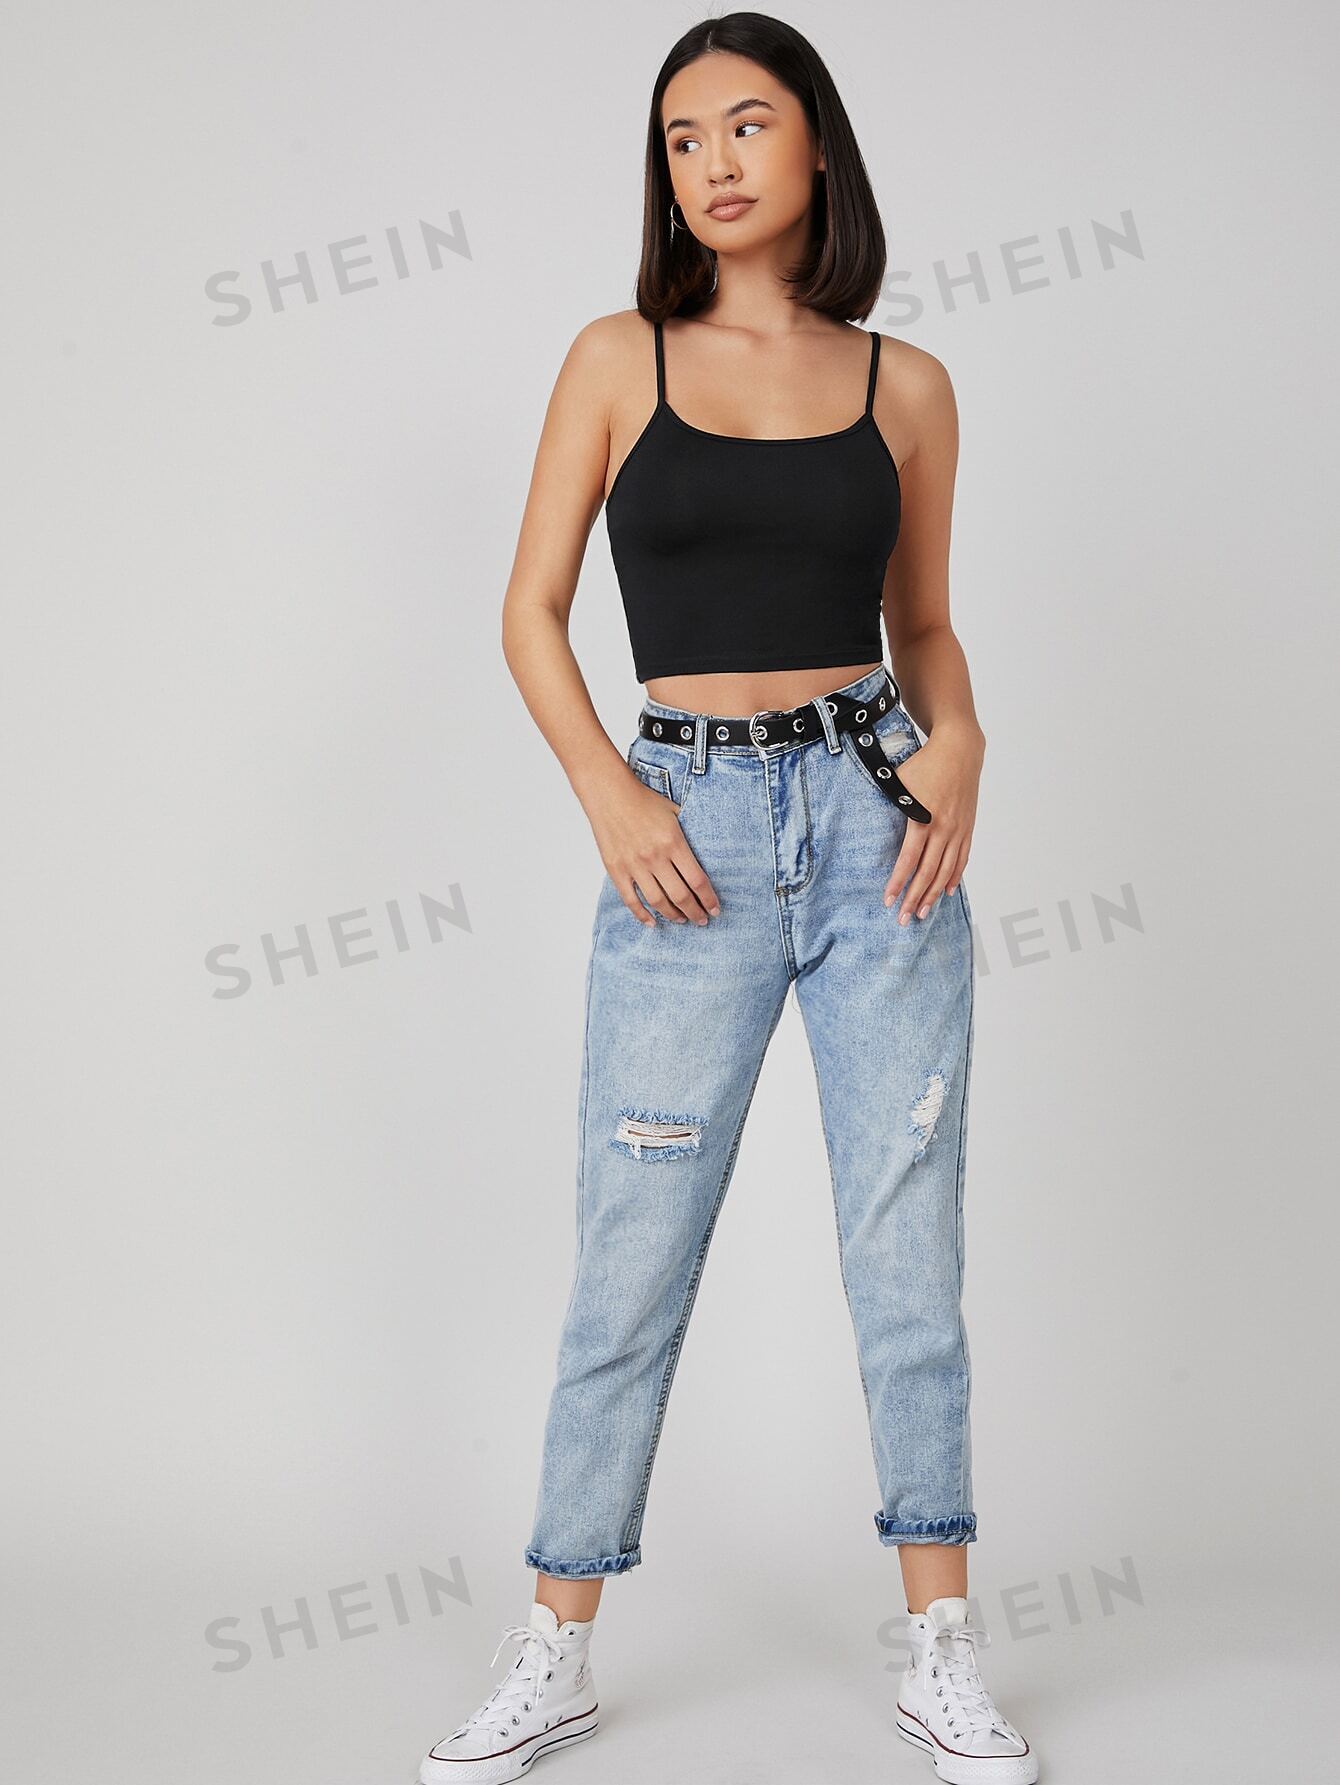 SHEIN BASICS Solid Form Fitted Crop Top For Summer